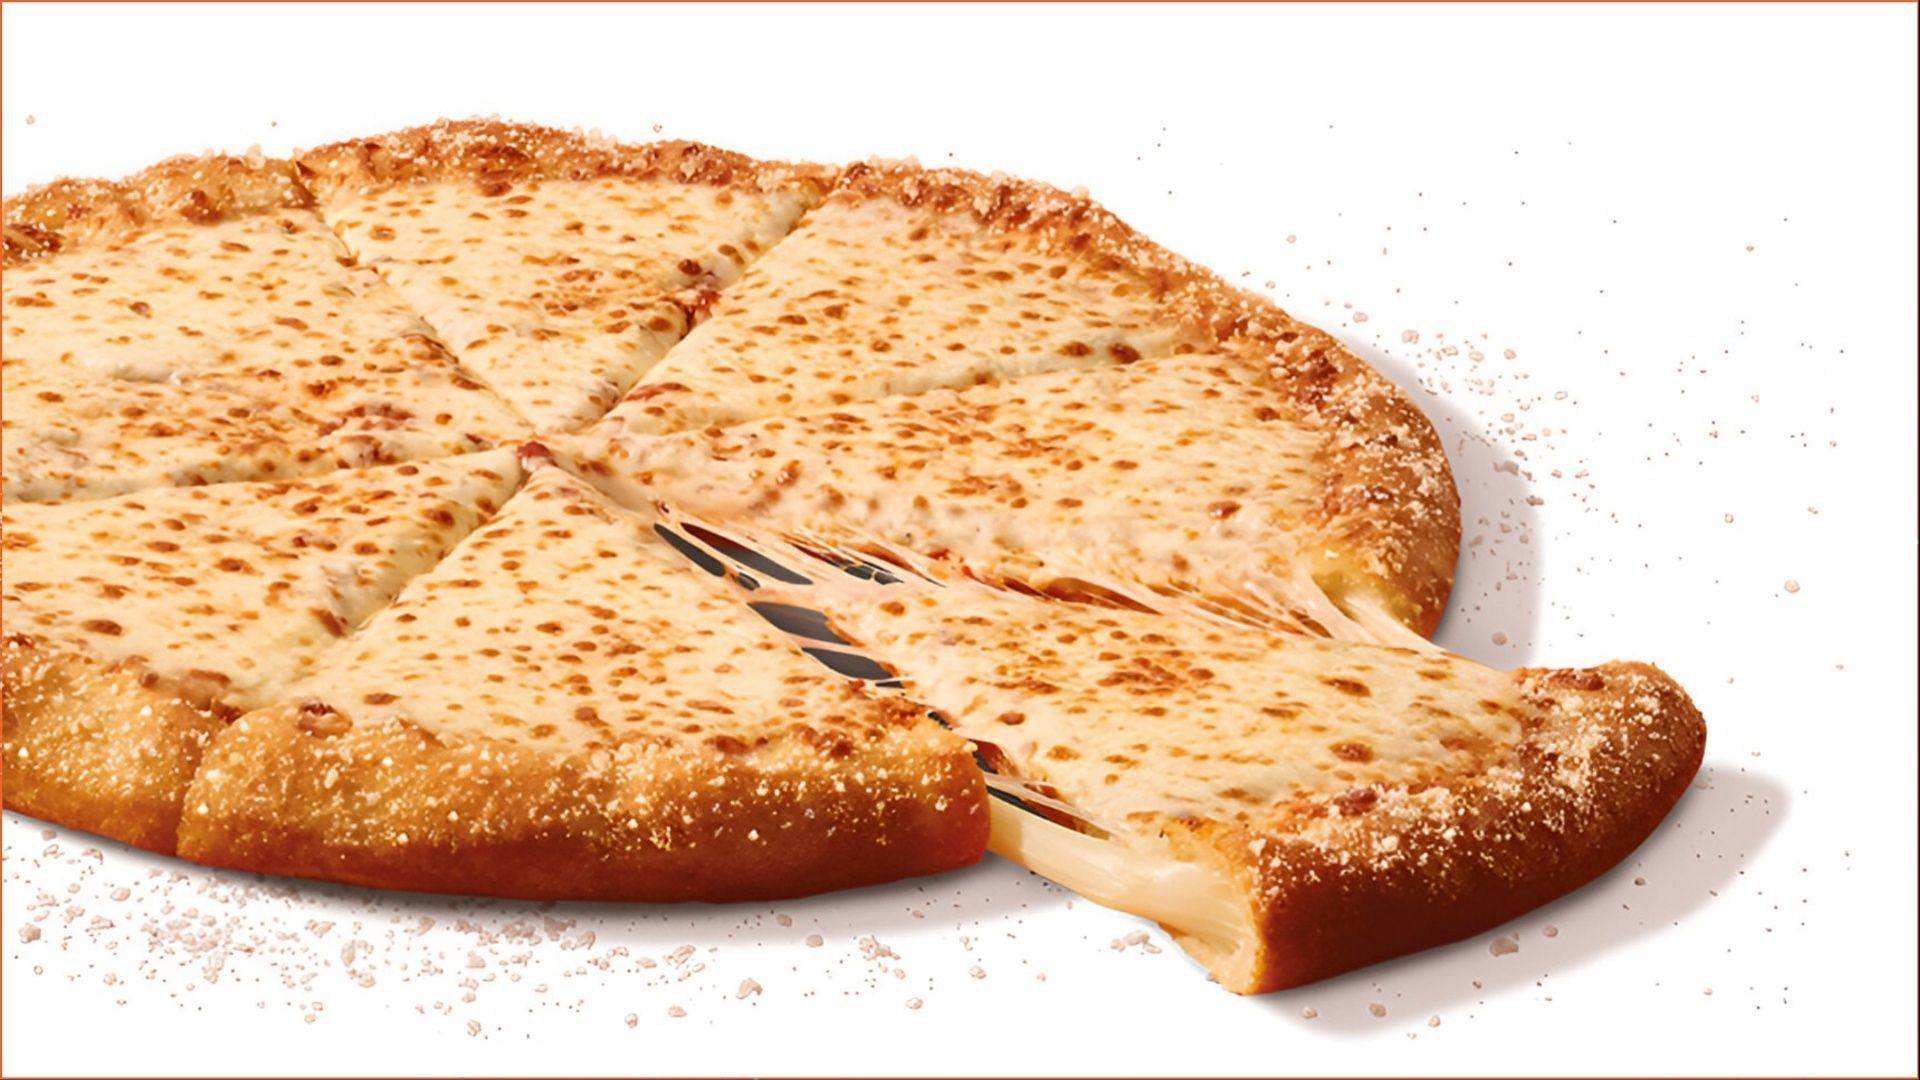 The new Stuffed Crazy Crust Pizza is now available in stores (Image via Little Caesars)